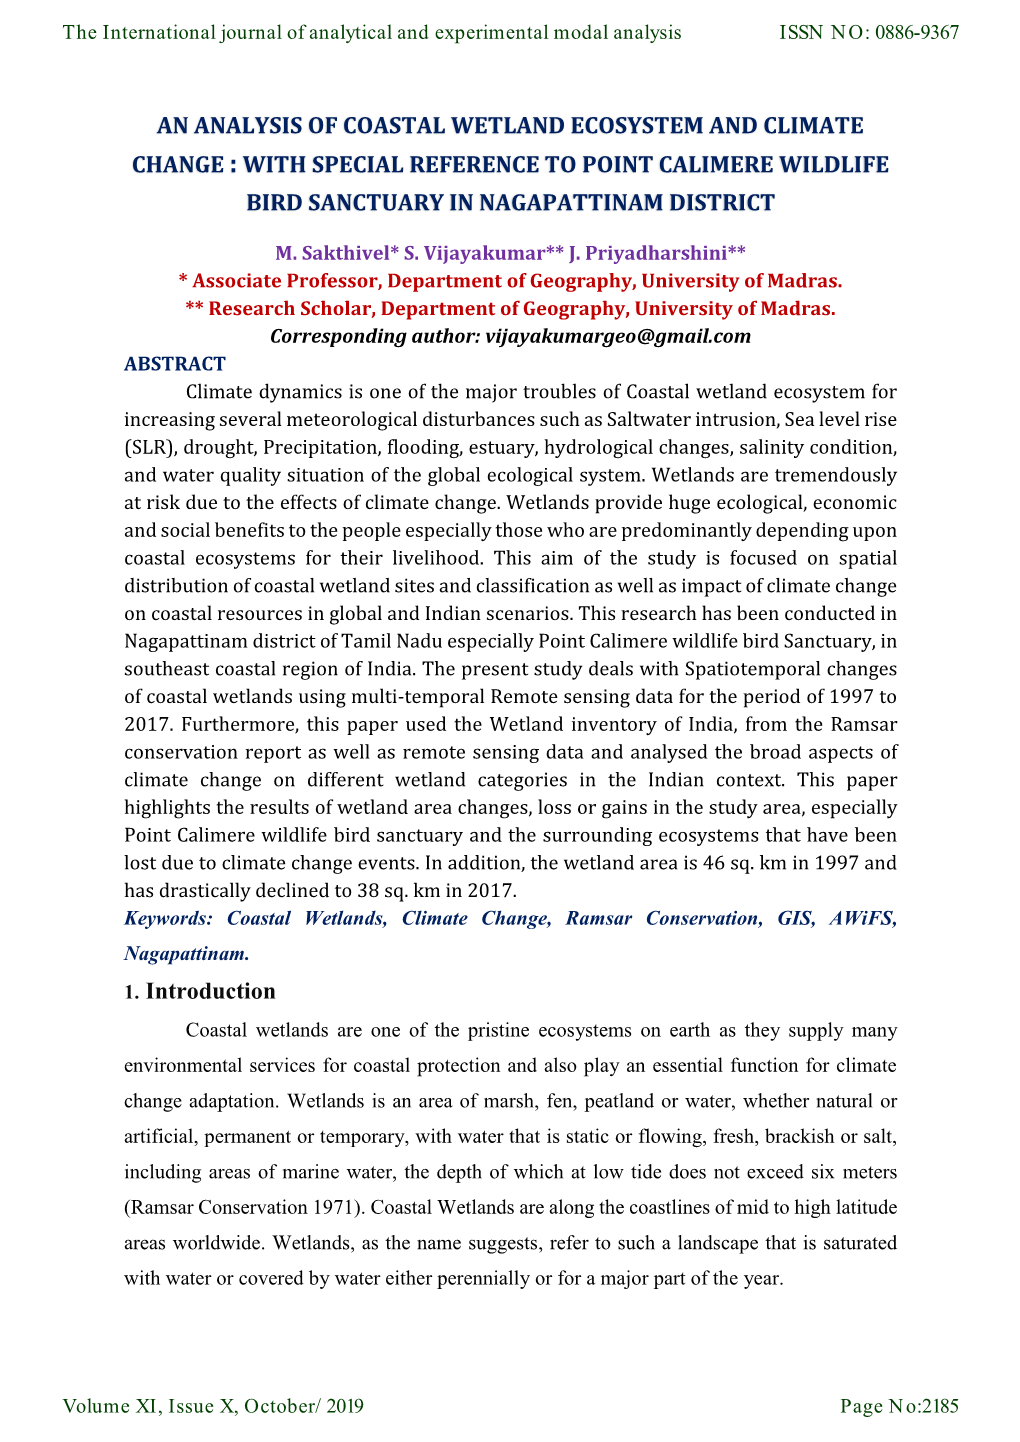 An Analysis of Coastal Wetland Ecosystem and Climate Change : with Special Reference to Point Calimere Wildlife Bird Sanctuary in Nagapattinam District